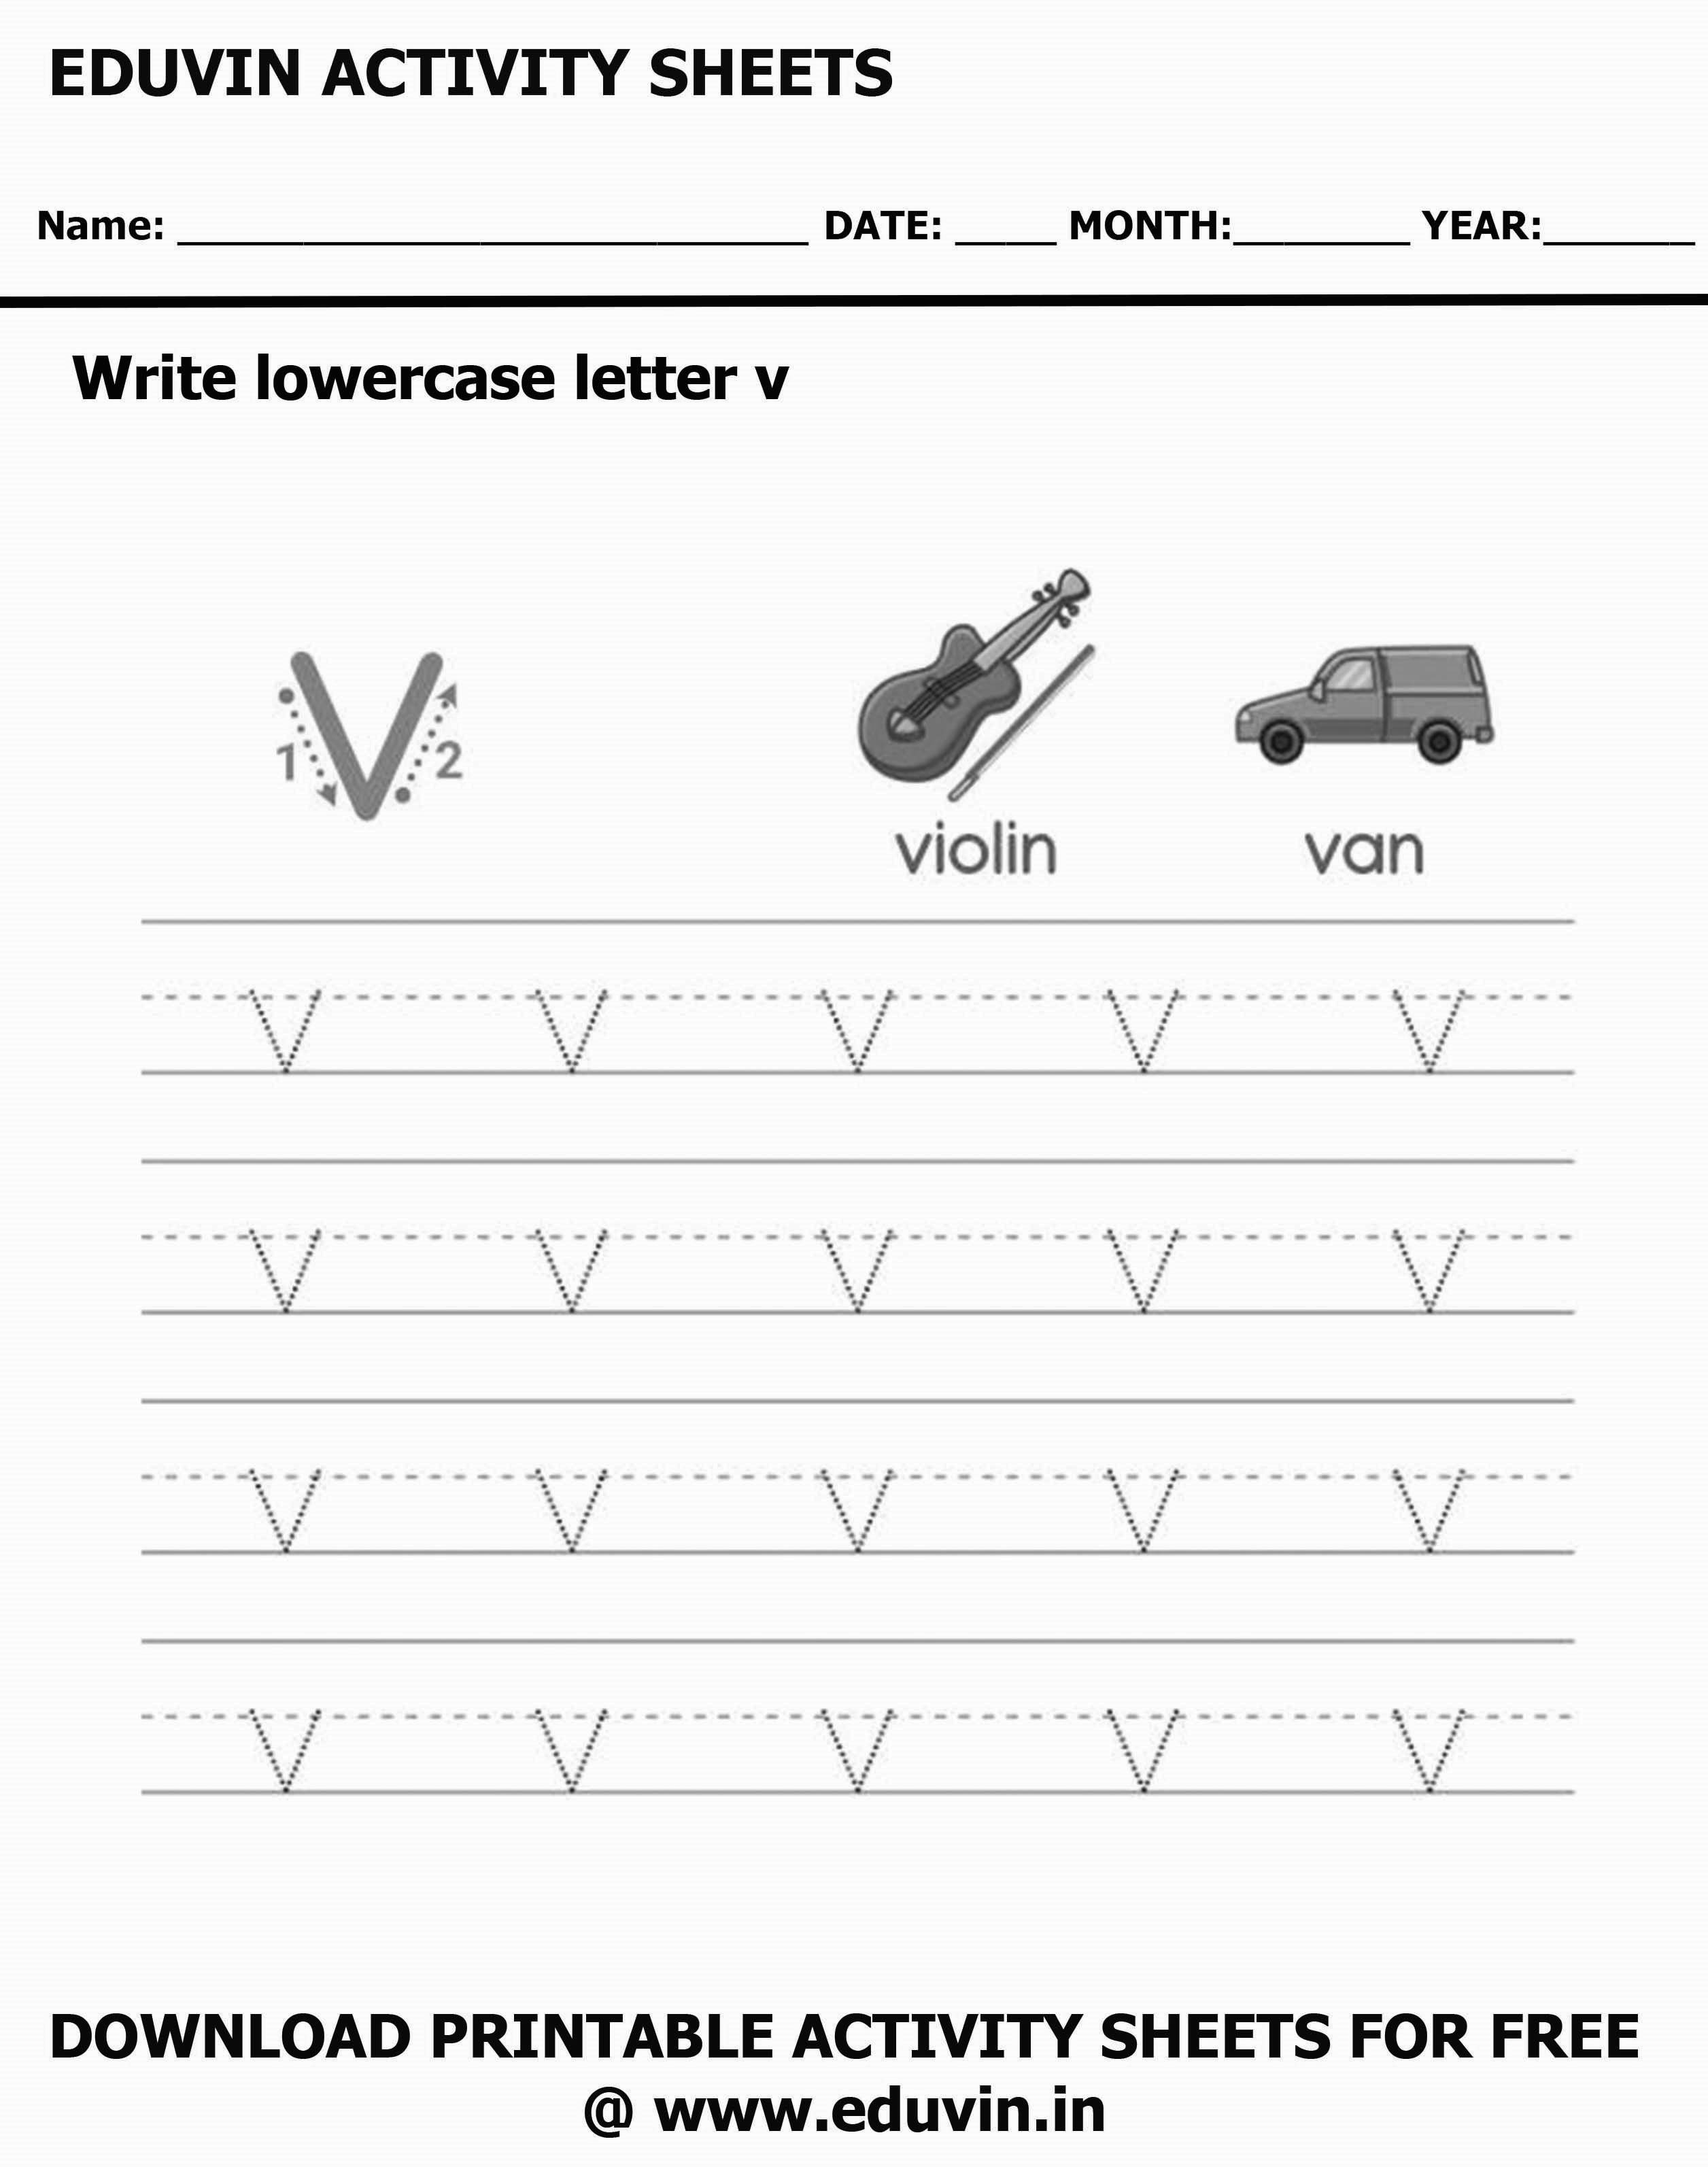 Lowercase Alphabet v Worksheets | Letter v Trace and Write Activity Sheet For Tracing and Letter Writing For Kids